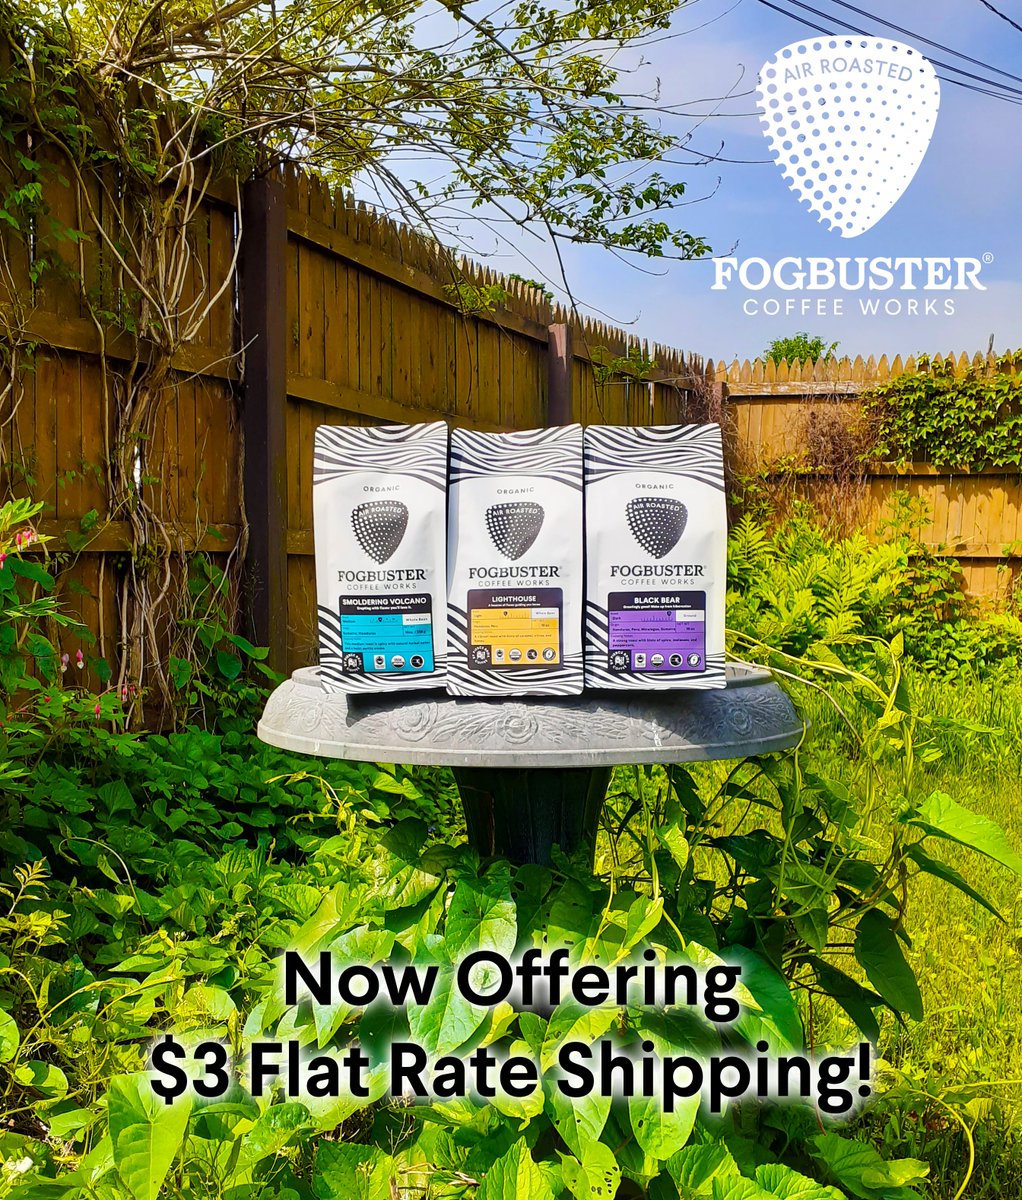 You can have these or any of our other amazing offering, shipped for only $3 Flat!
Discover the air roasted advantage!
fogbustercoffee.com
#fogbustercoffee #airroastedcoffee #organiccoffee #darkroast #fairtradecoffee #mediumroast #koshercoffee #lightroast #smoothcoffee #java